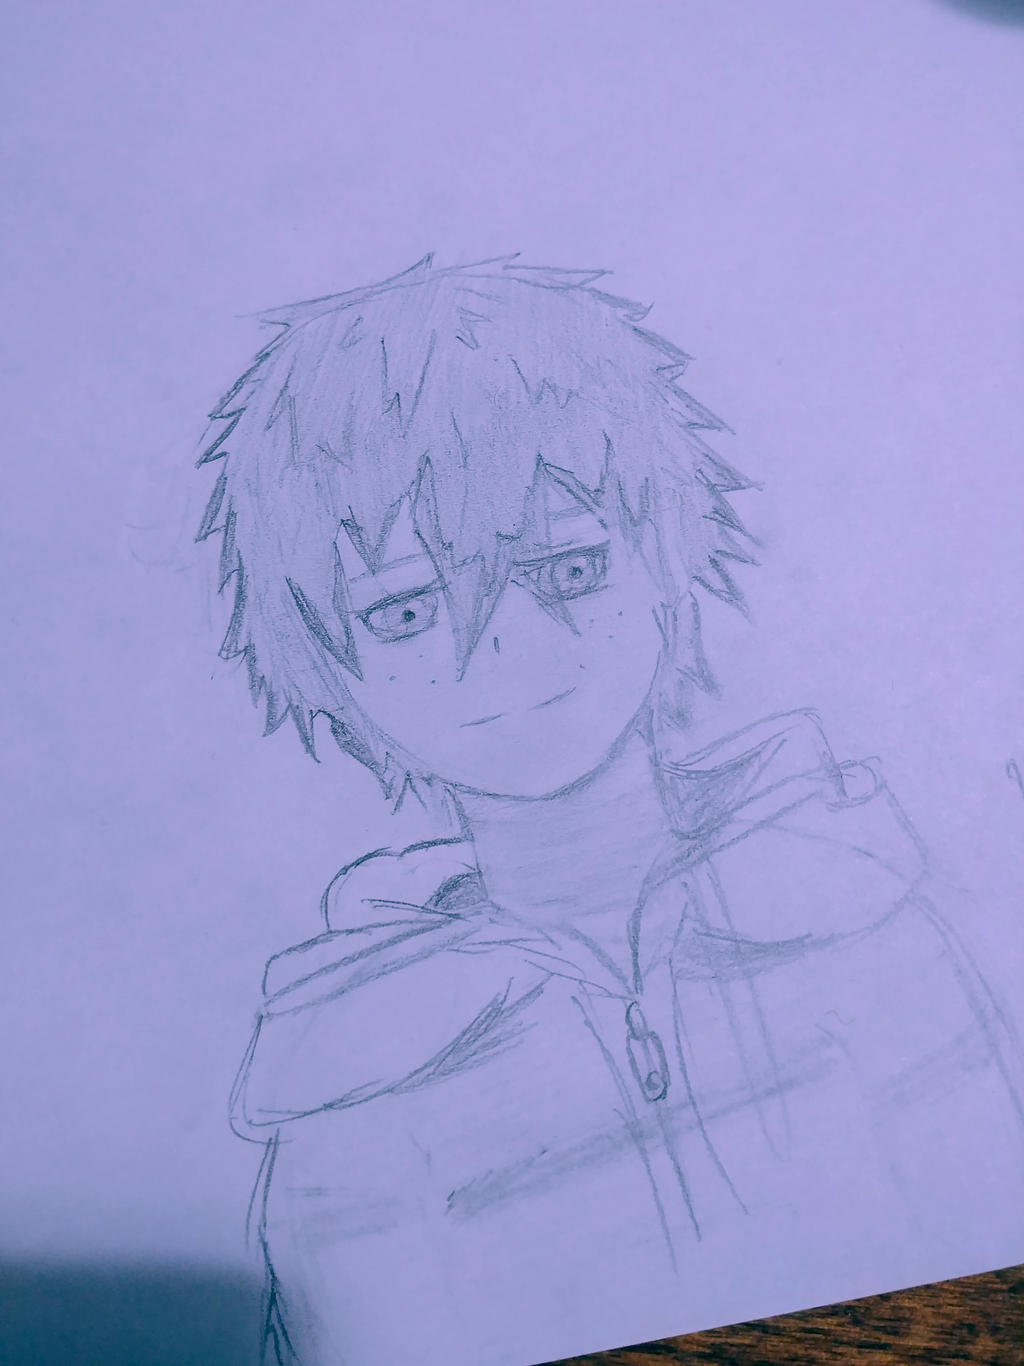 Anime boy with hoodie by Keioxd on DeviantArt